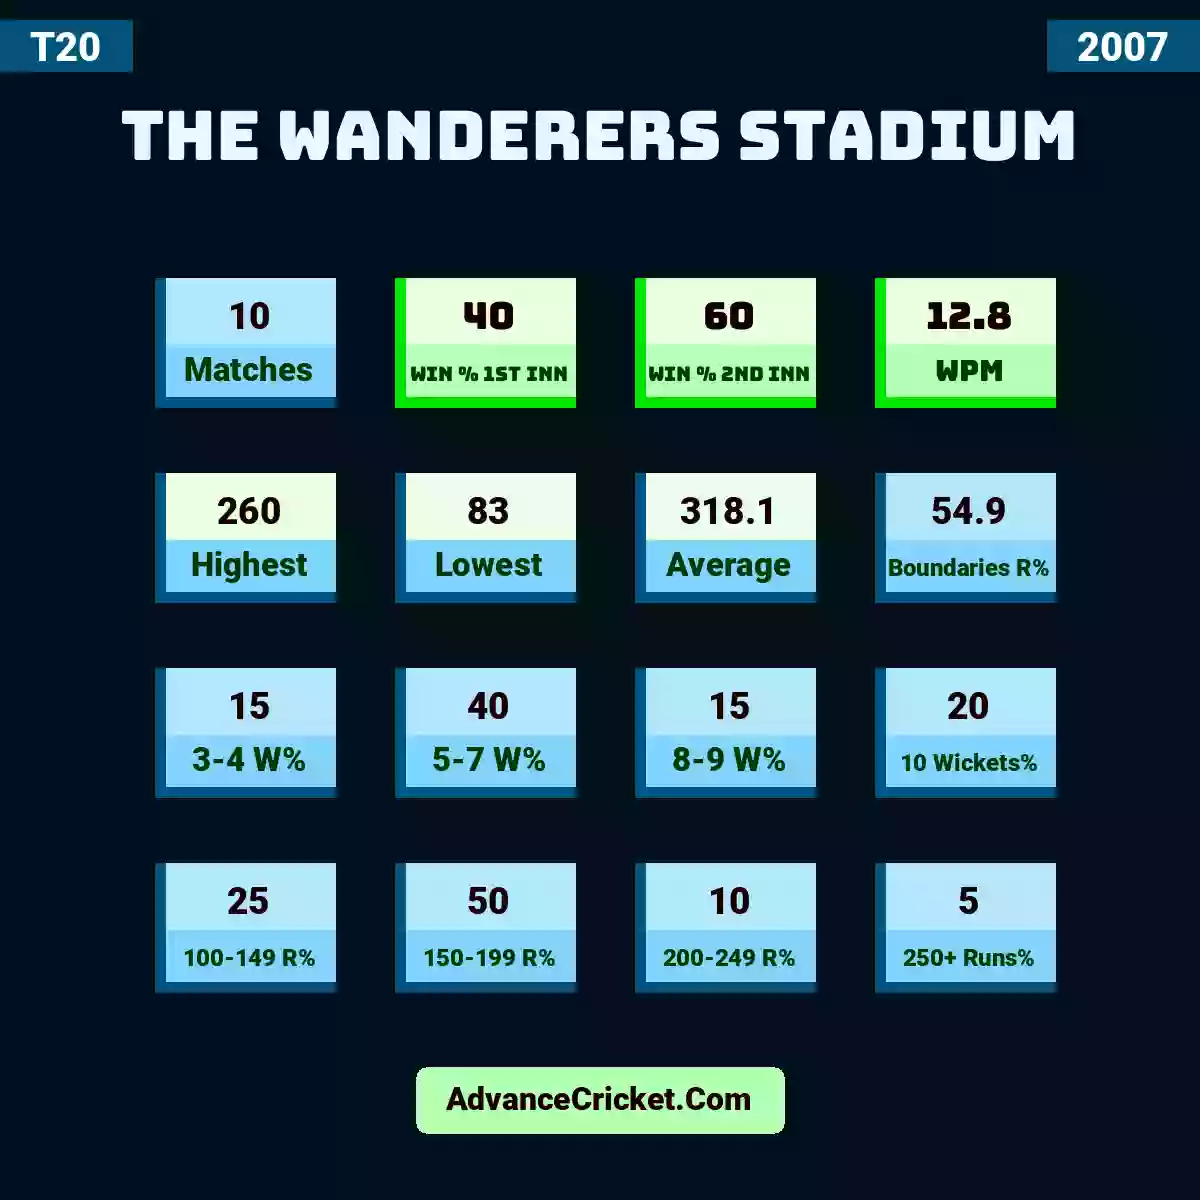 Image showing The Wanderers Stadium with Matches: 10, Win % 1st Inn: 40, Win % 2nd Inn: 60, WPM: 12.8, Highest: 260, Lowest: 83, Average: 318.1, Boundaries R%: 54.9, 3-4 W%: 15, 5-7 W%: 40, 8-9 W%: 15, 10 Wickets%: 20, 100-149 R%: 25, 150-199 R%: 50, 200-249 R%: 10, 250+ Runs%: 5.